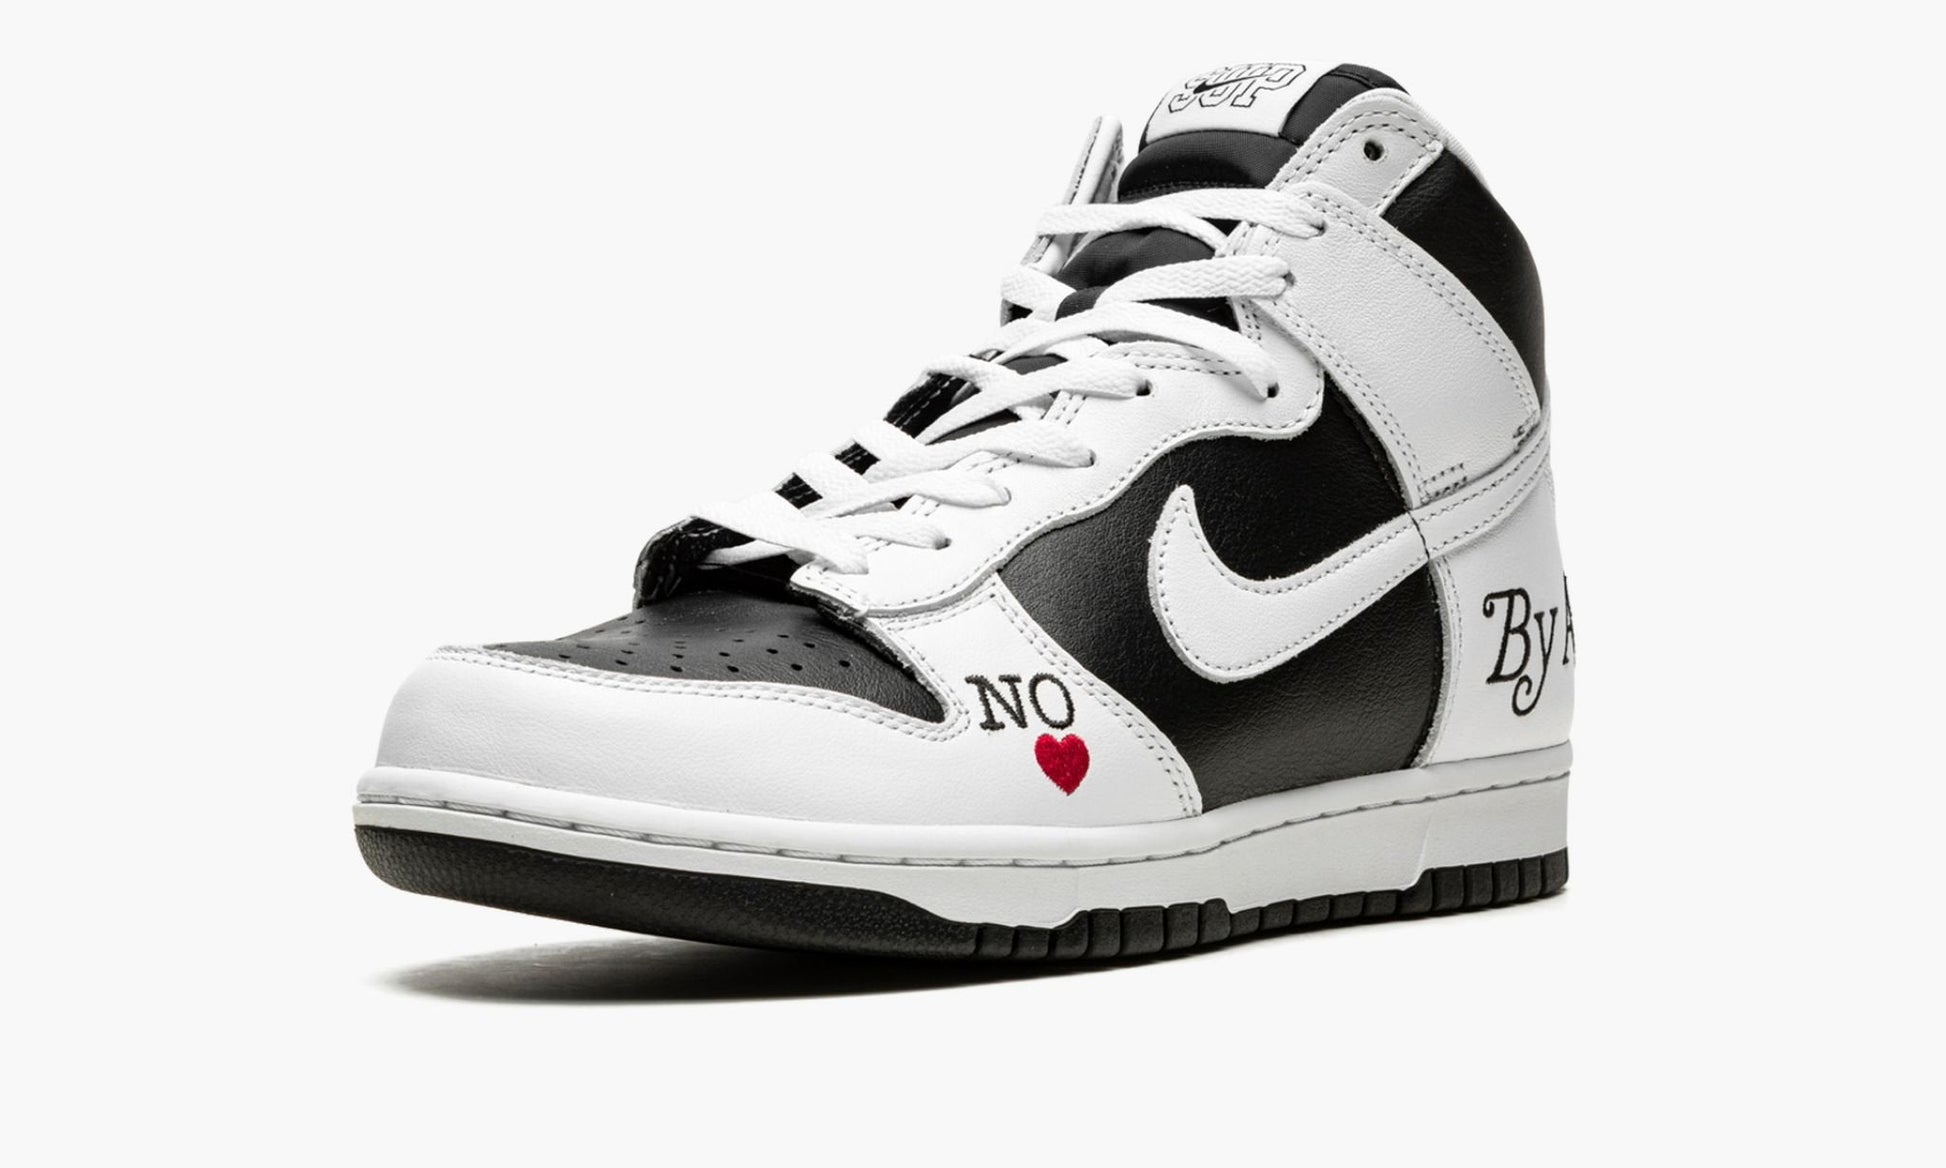 SB Dunk High "Supreme - By Any Means - White/Black"